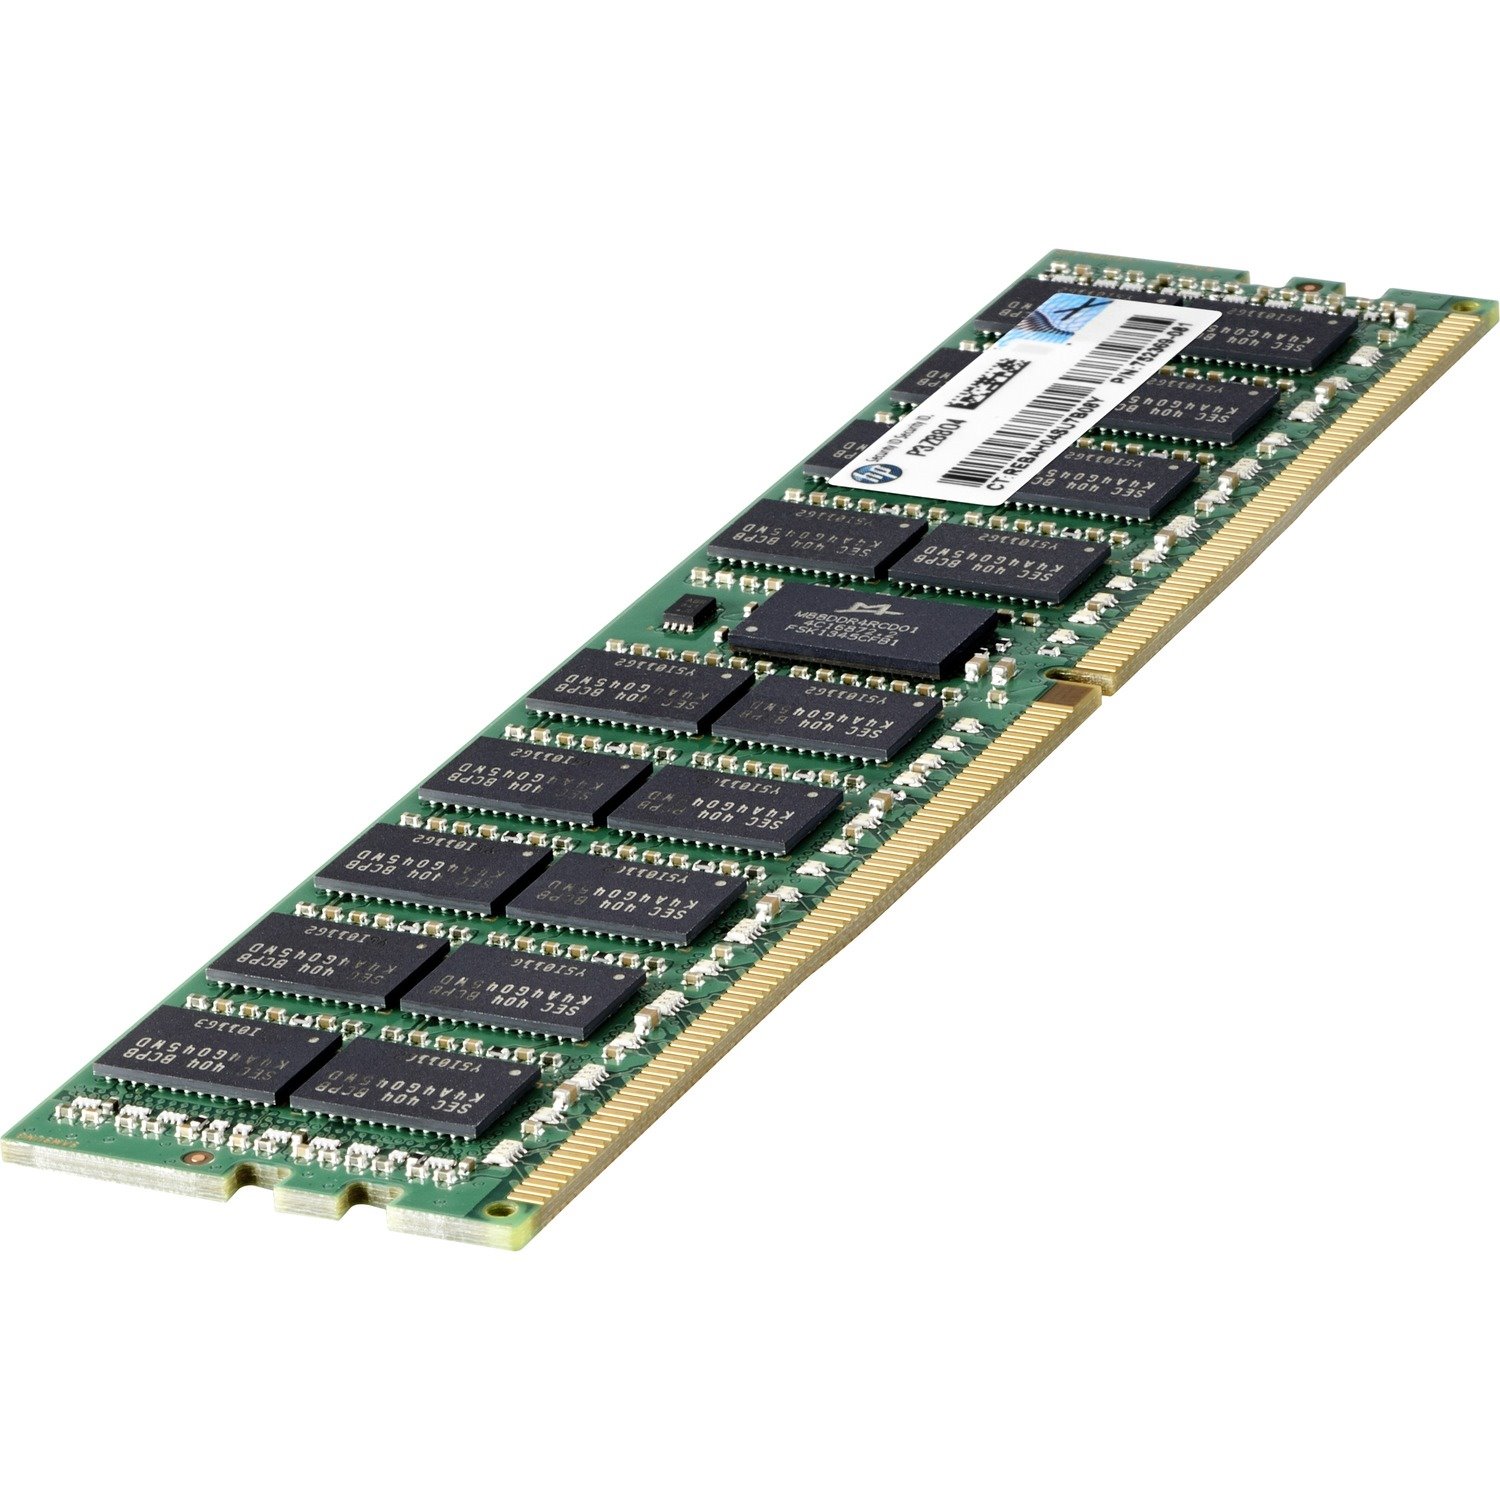 HPE Sourcing 8GB (1x8GB) Single Rank x4 DDR4-2133 CAS-15-15-15 Registered Memory Kit